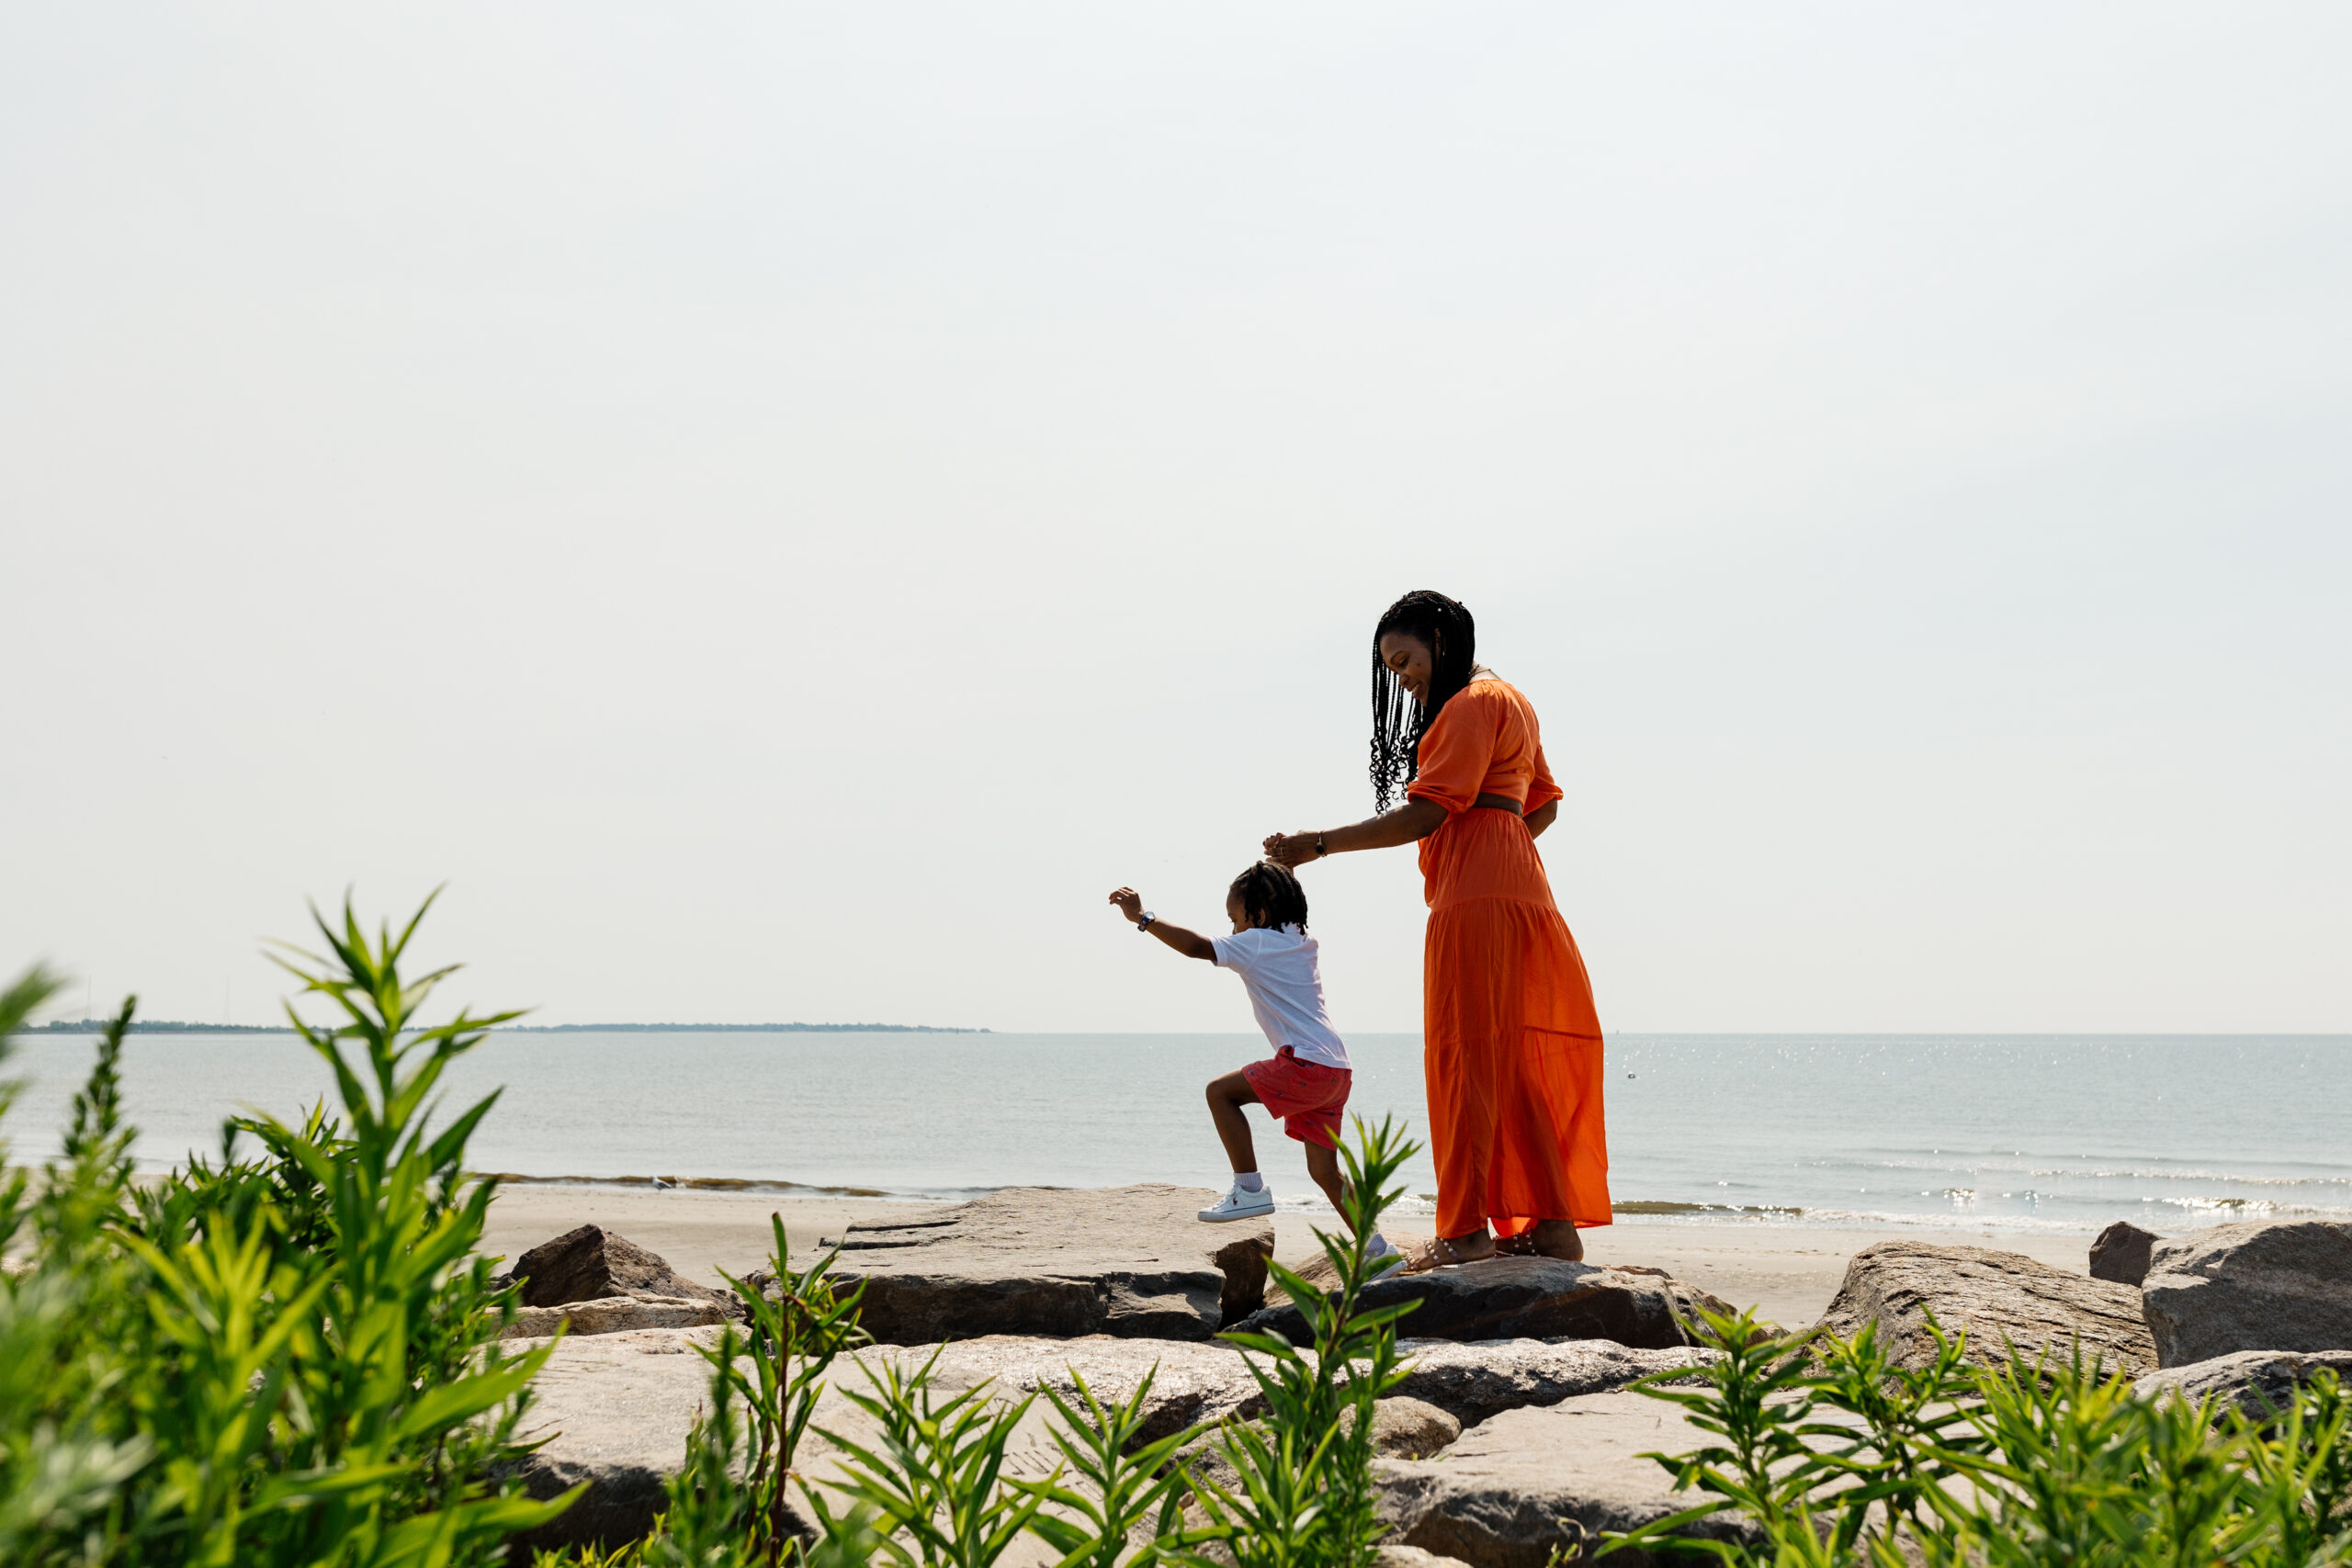 A woman in an orange dress and a child standing on rocks near the ocean.